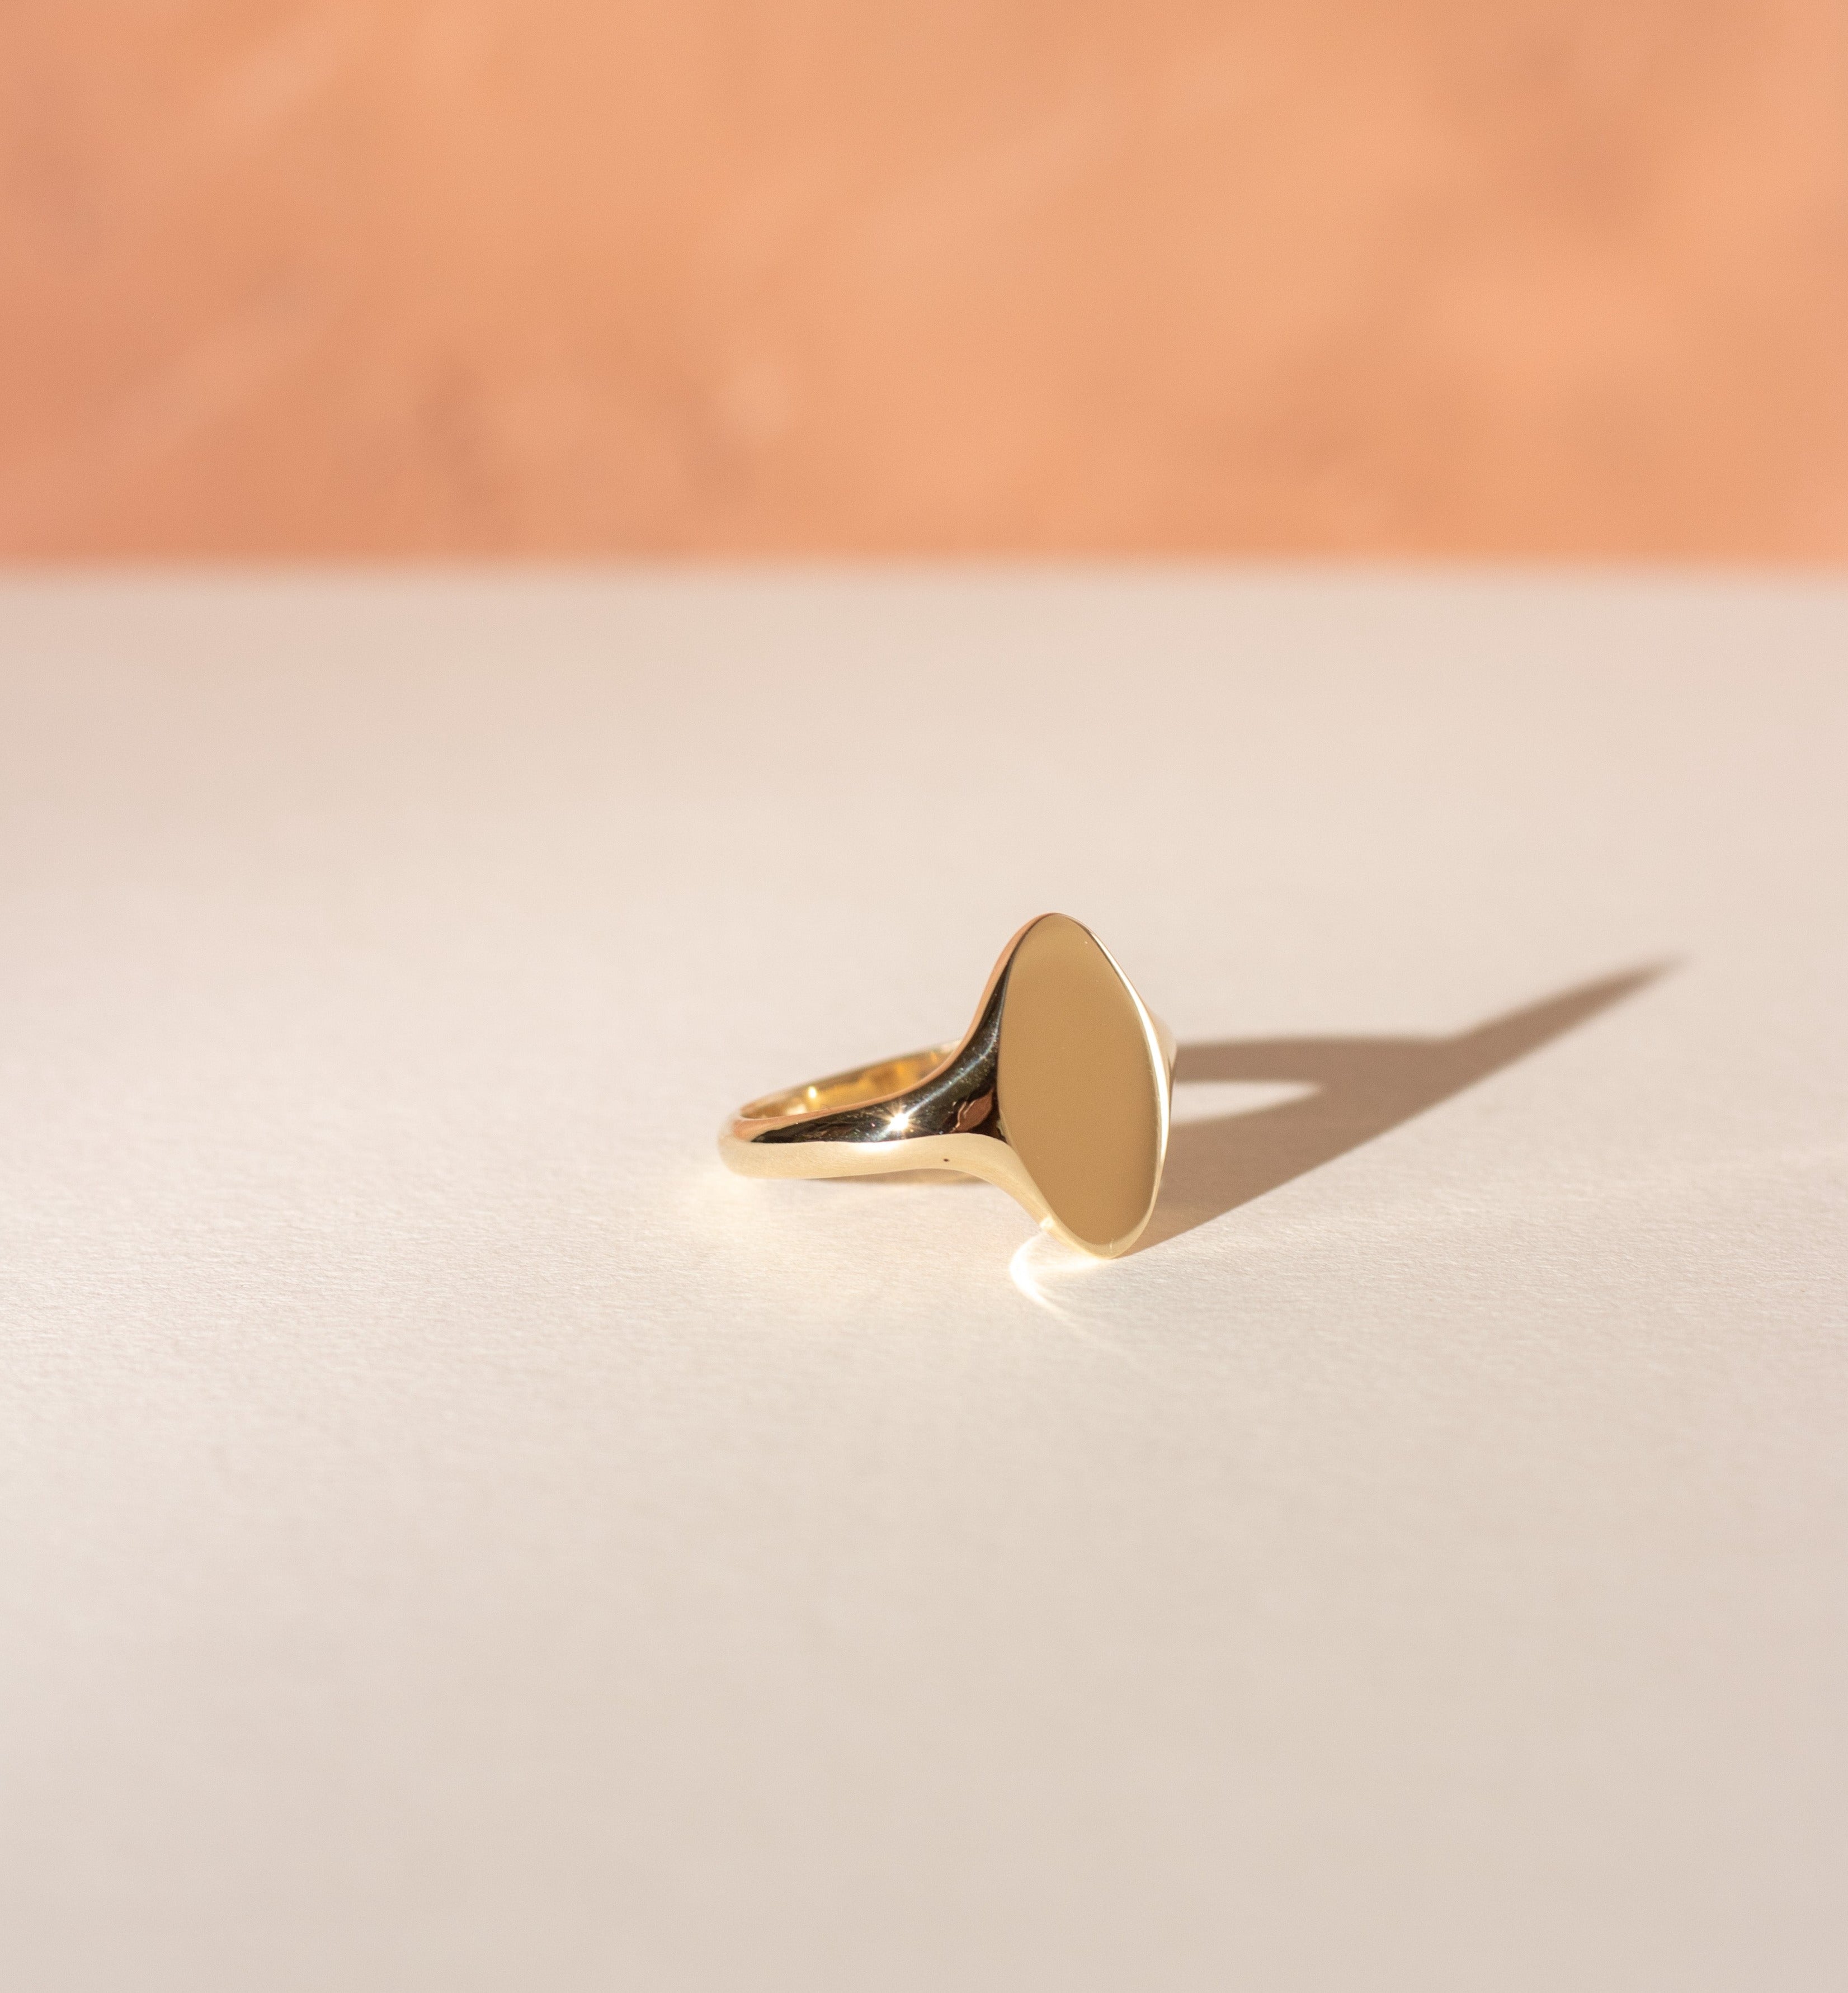 The Almond Signet Ring